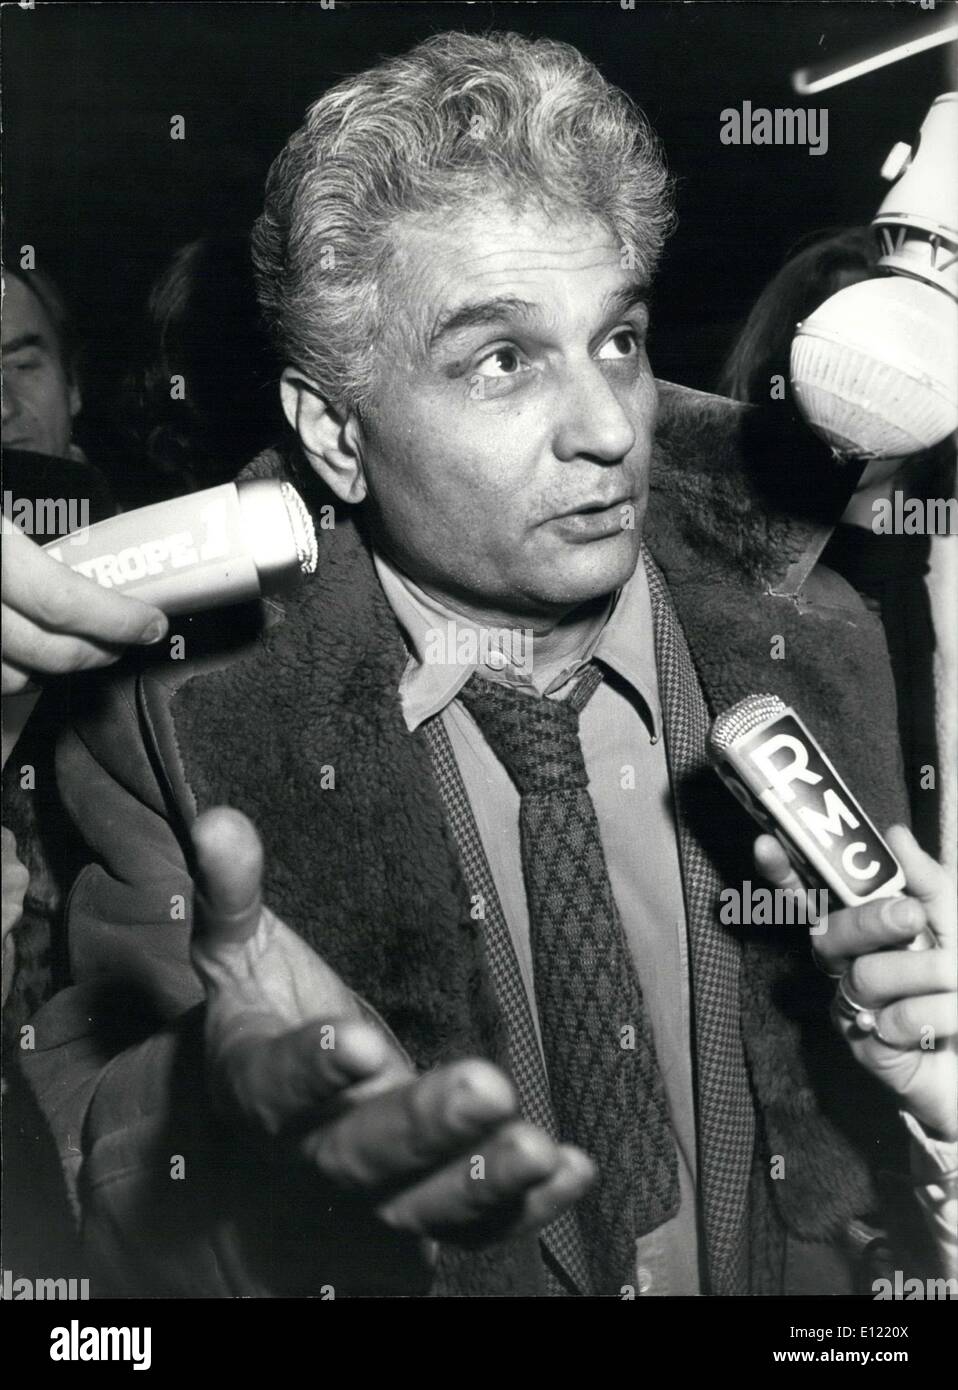 Jan. 04, 1982 - Philosopher Jacques Derrida was arrested and imprisoned after customs agents in the Prague airport found drugs in his suitcase. However, according to the philosopher and the French authorities, the arrest was a political move to deter French intellectuals from visiting Poland, more than a reaction to what Derrida had in his suitcase. Derrida is pictured here telling journalists about the horrid conditions in Czech prisons. Stock Photo